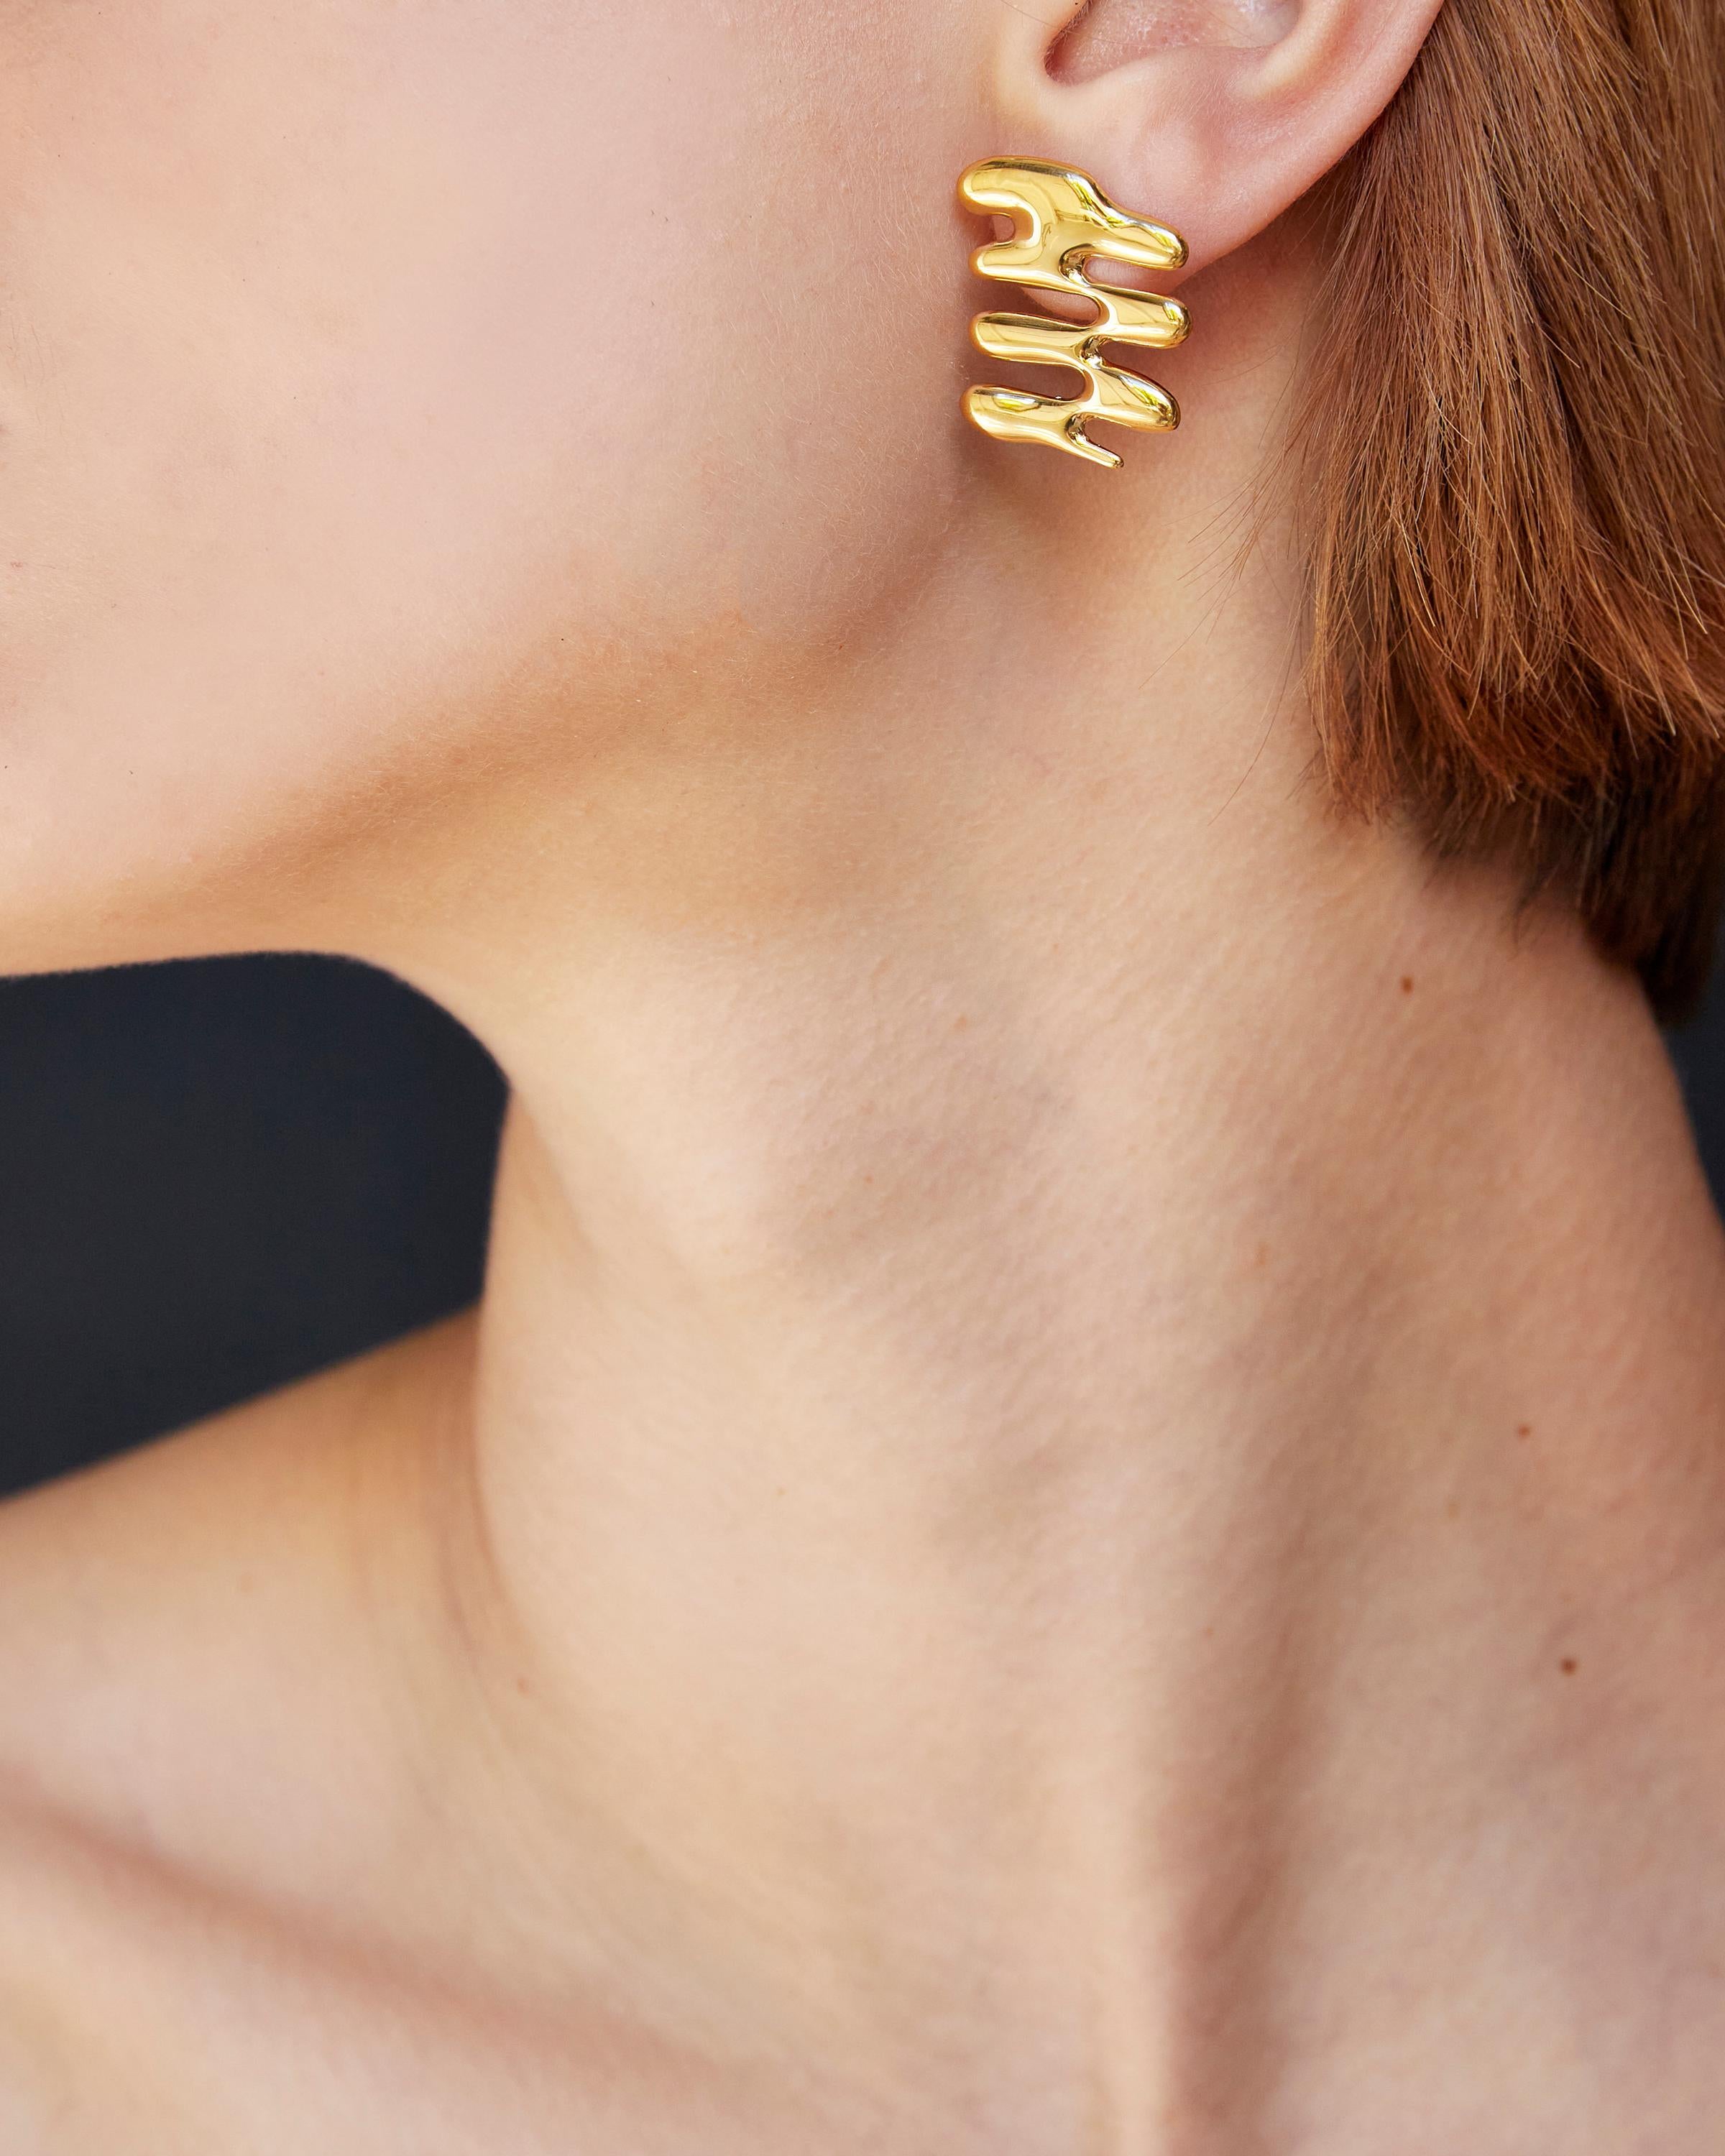 BAR Jewellery, London UK, SMALL VEGA EARRINGS, Gold Plated 

The Small Vega Earrings are asymmetric, with natural curved lines that flow like water and sparkle in the light. Inspired by Frank Gehry's iconic 'wiggle' chairs and created impulsively